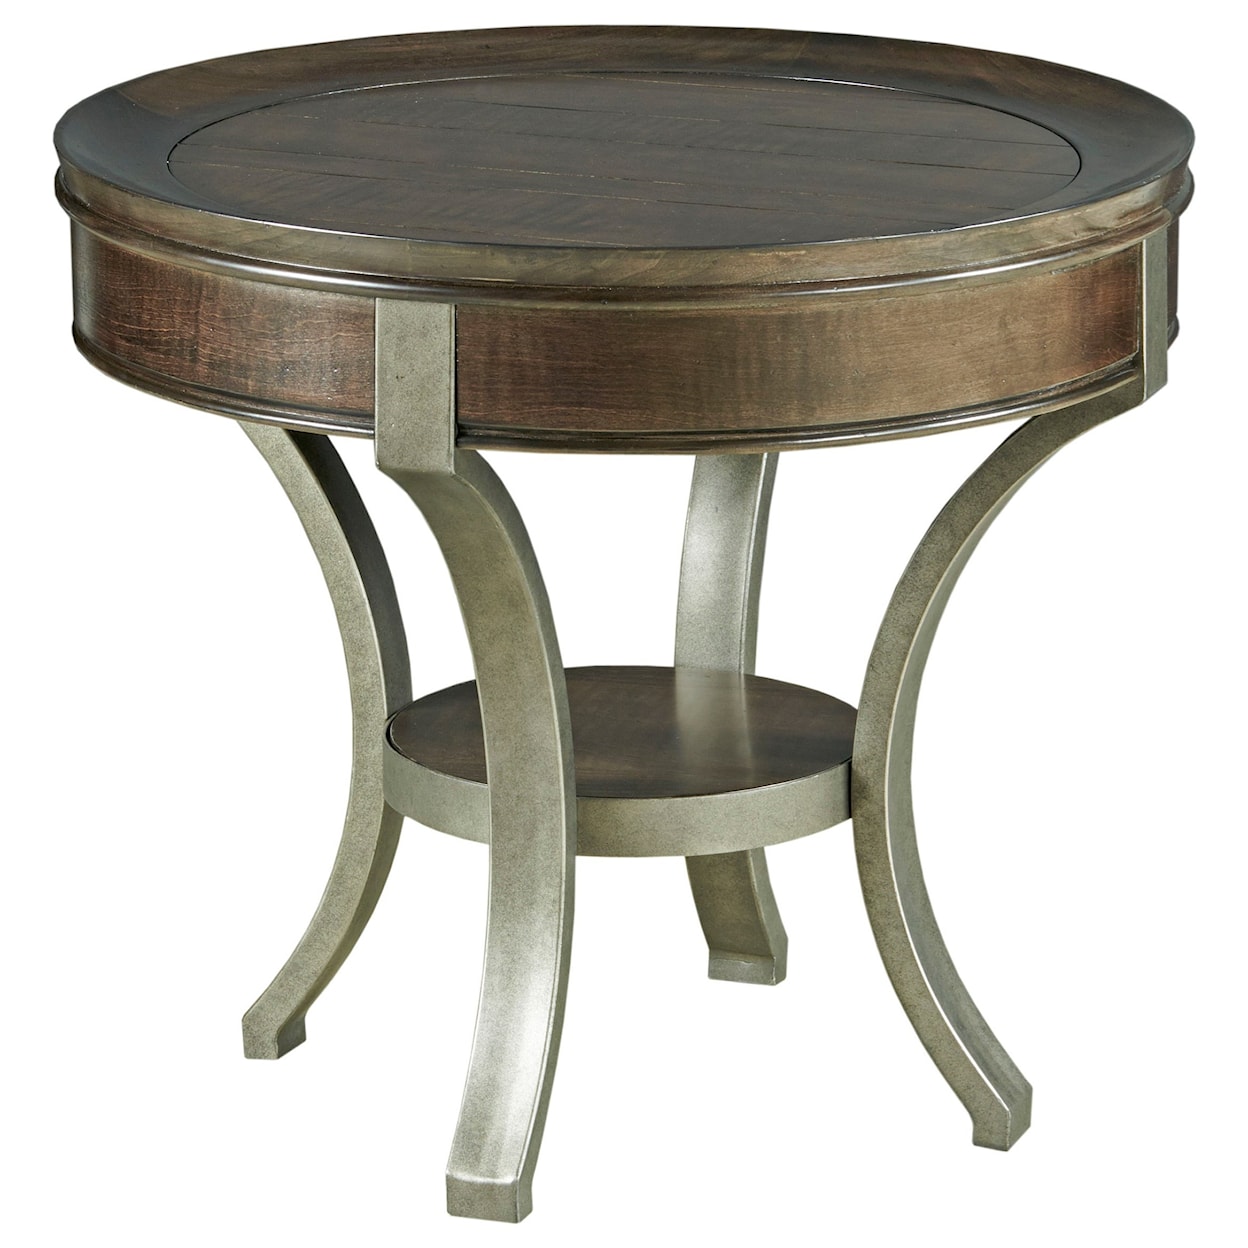 Hammary Sunset Valley Round End Table